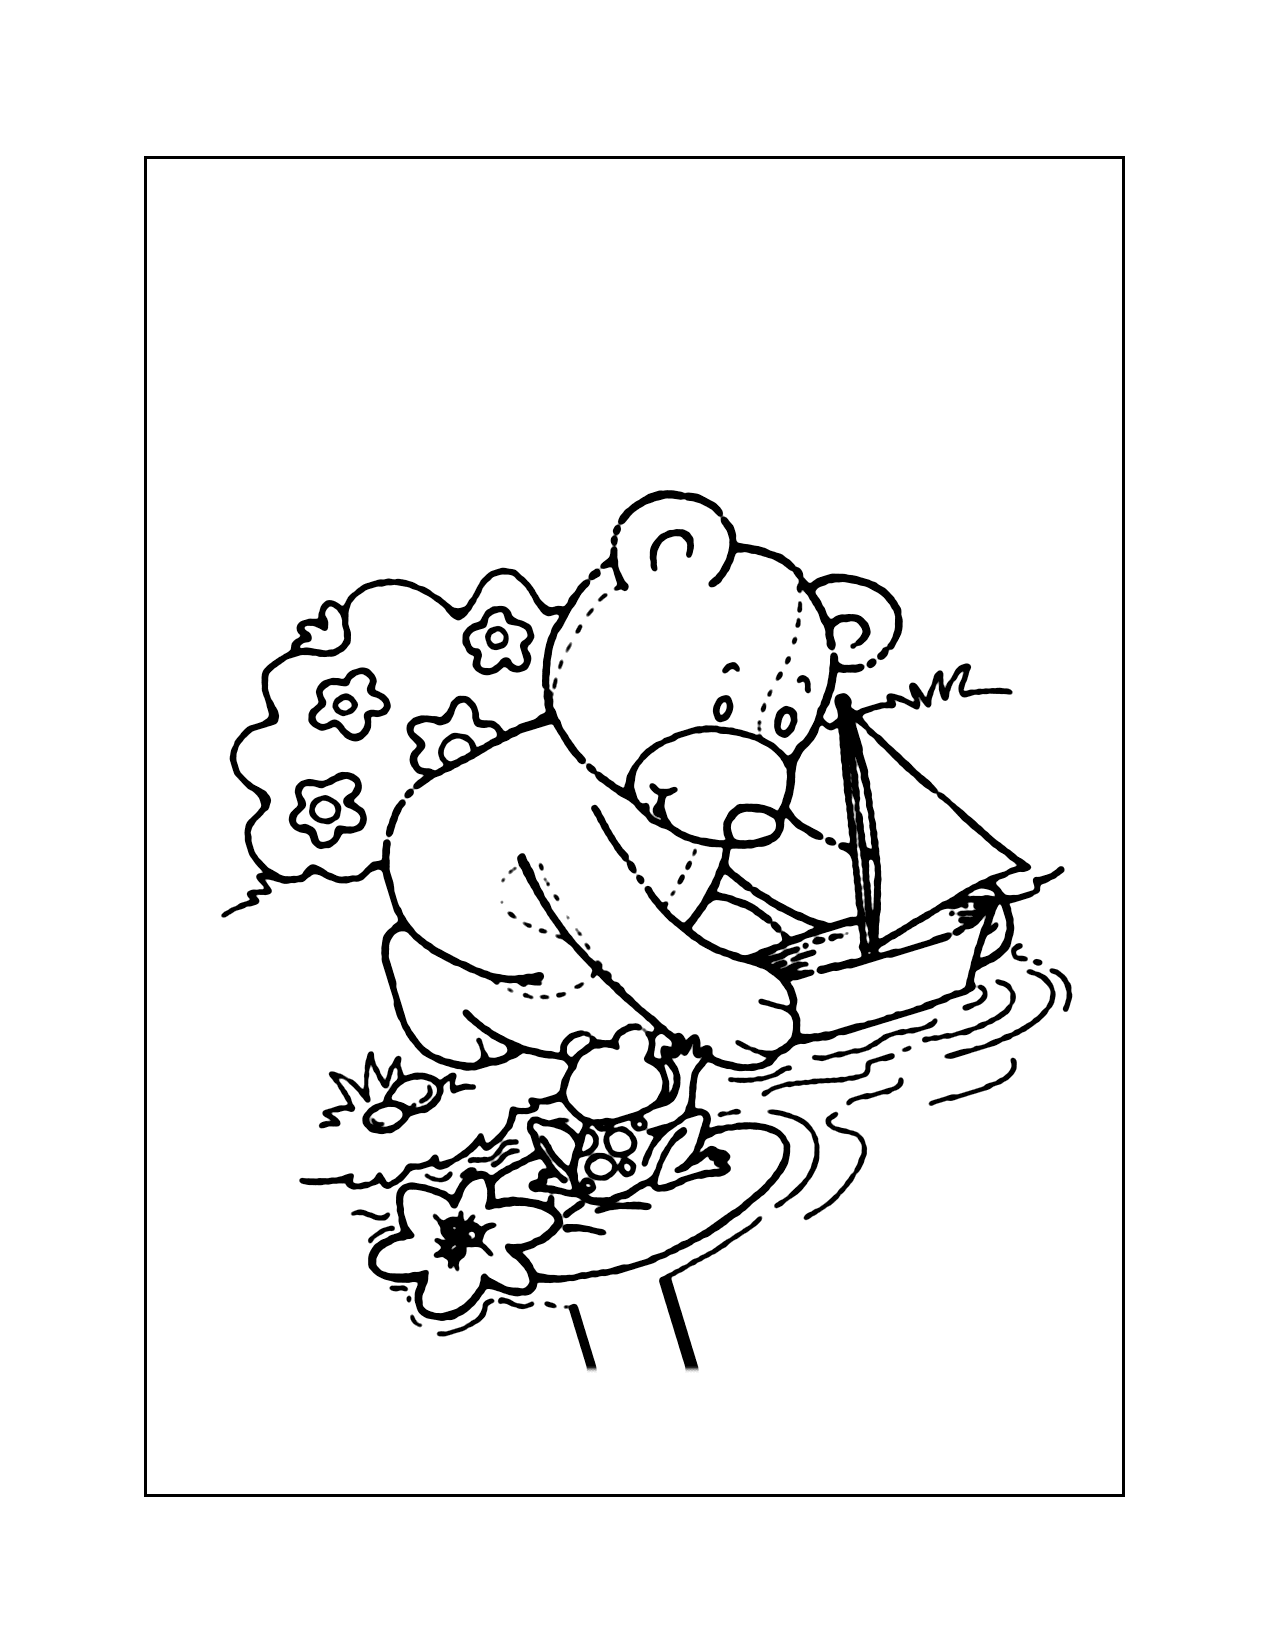 Teddy Bear Playing With A Boat Coloring Page